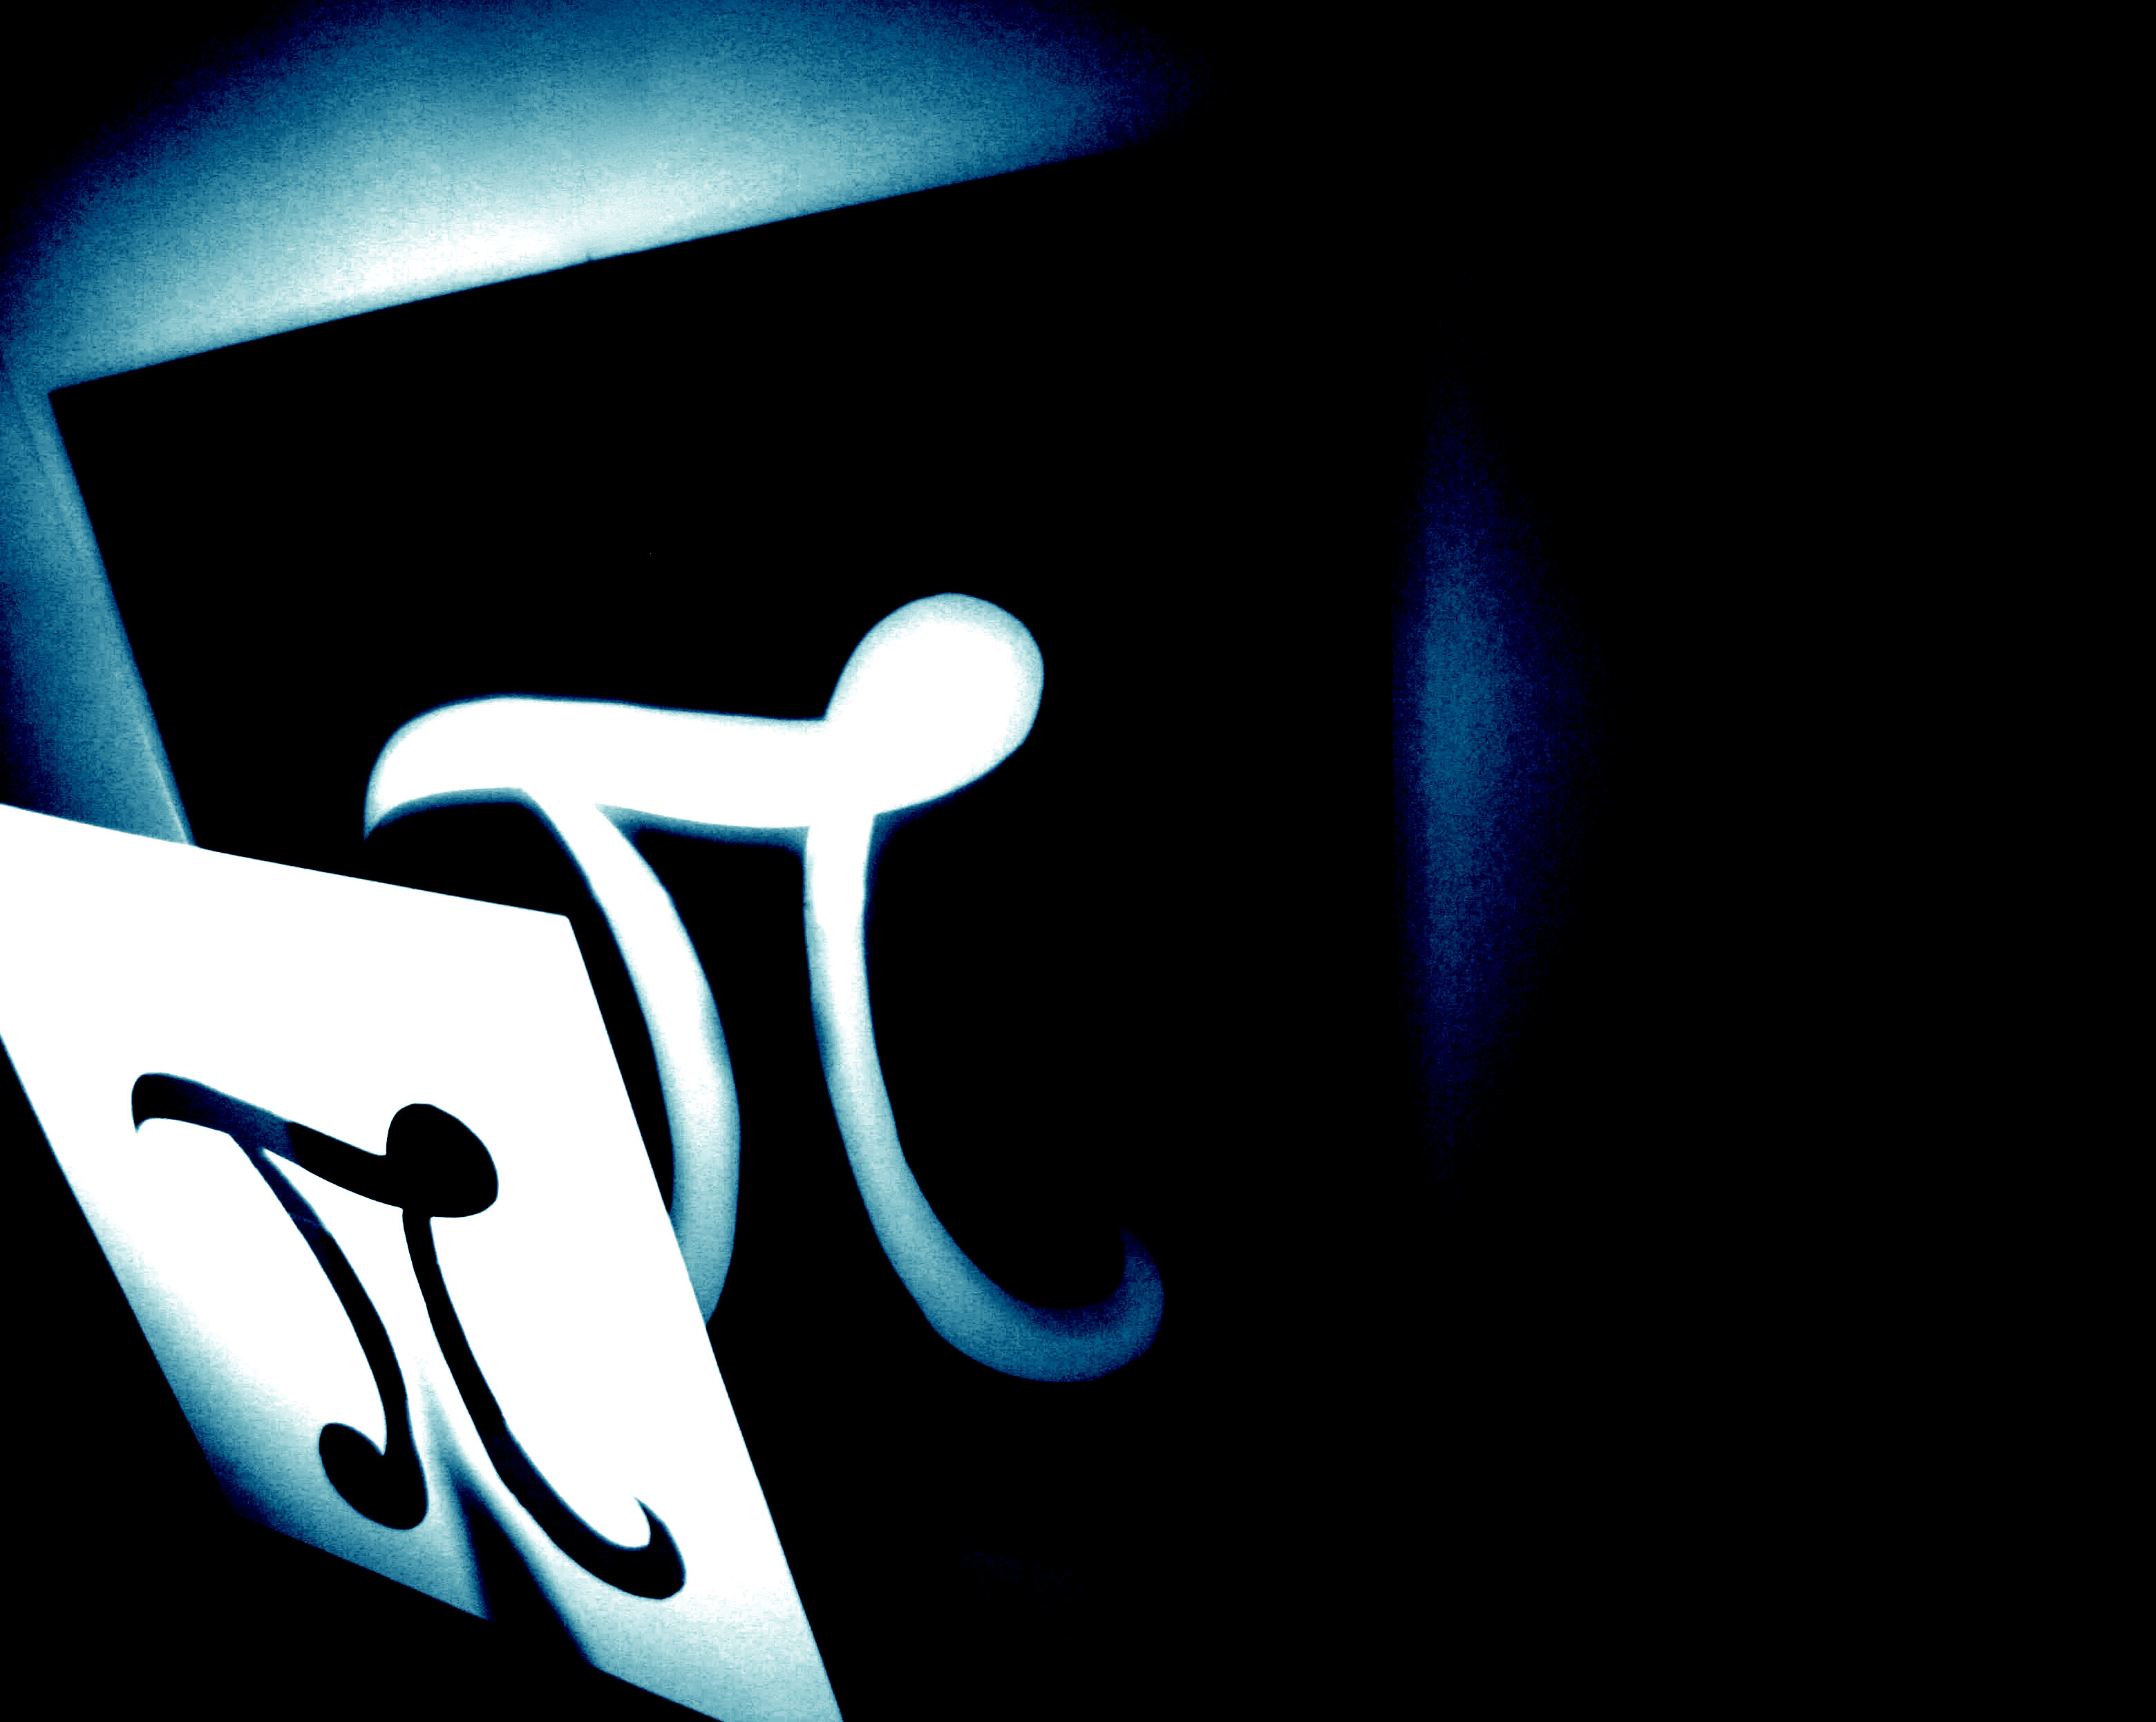 pi in shadow